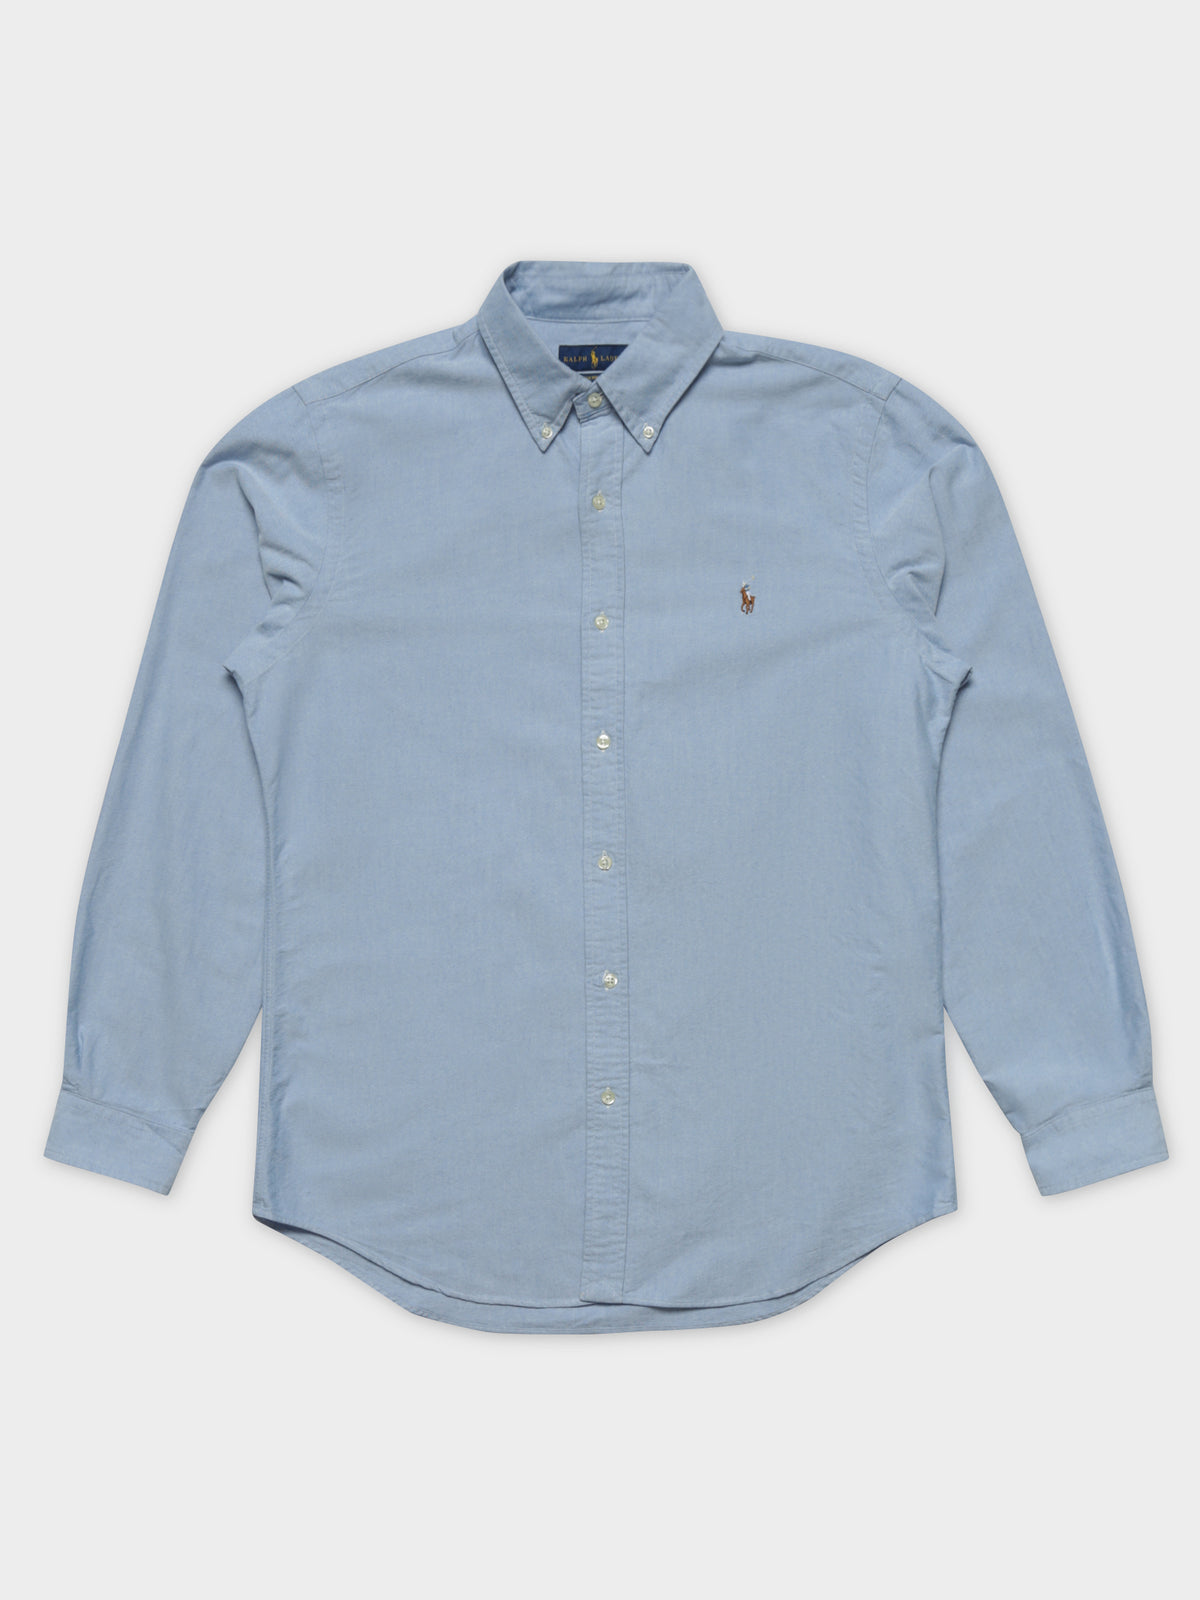 Oxford Long Sleeve Shirt in Blue